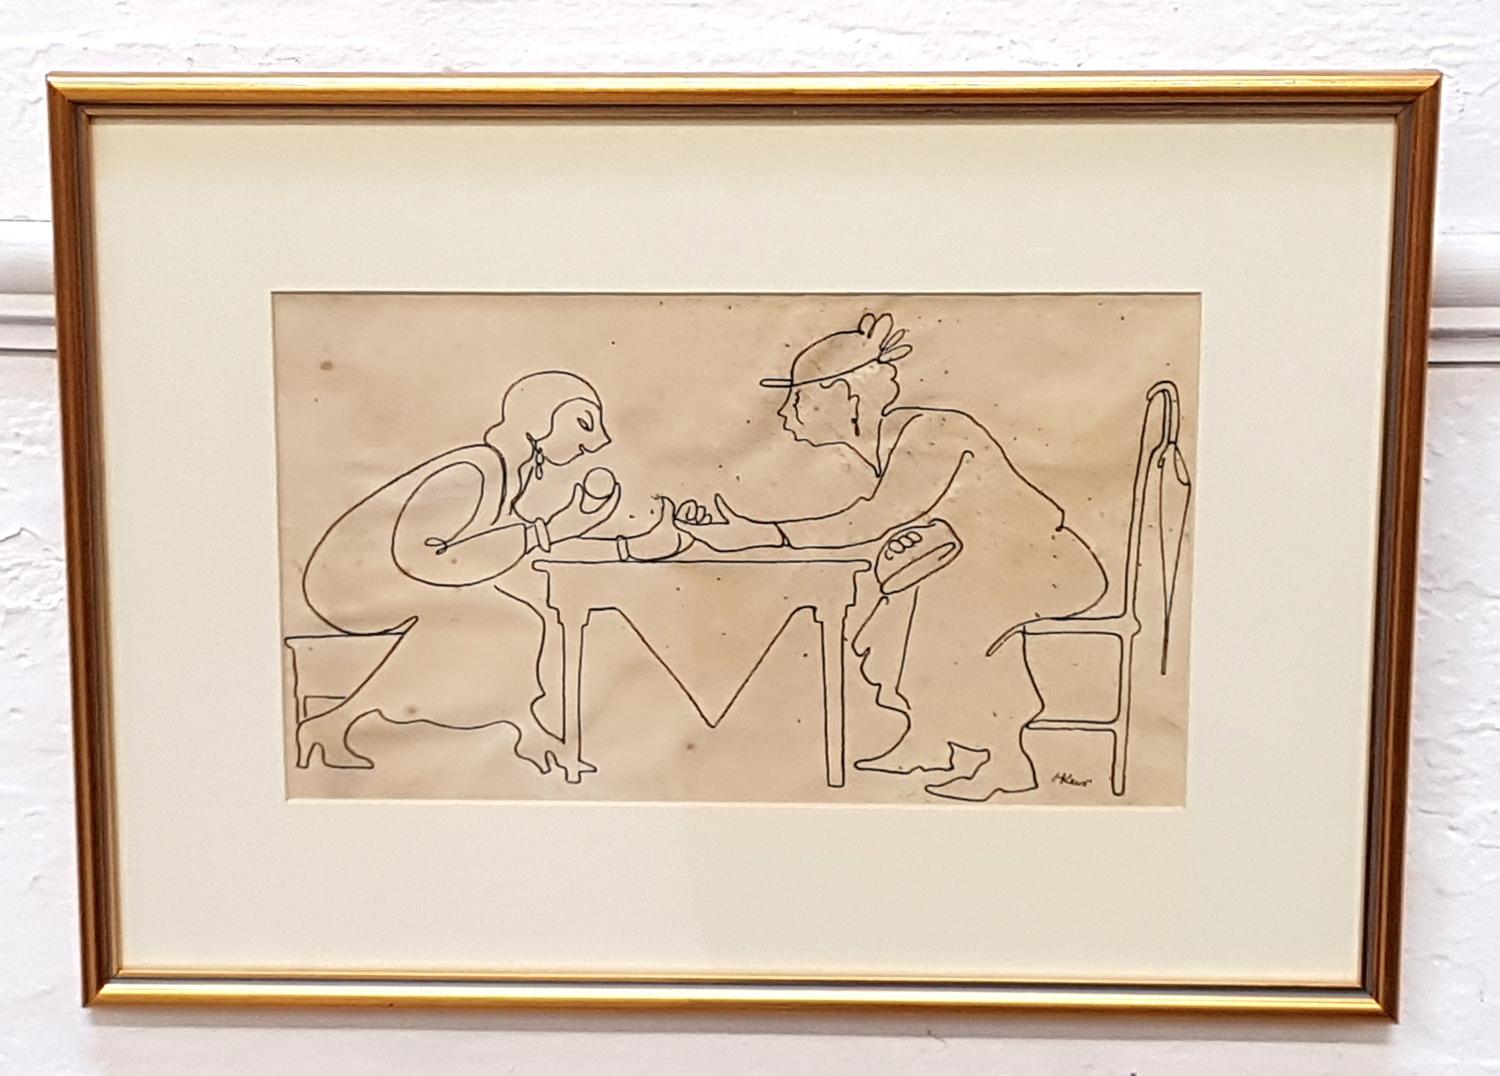 HARRY KEIR (Scottish 1902-1977) The Fortune Teller, pen and ink on paper, signed, 17.5cm x 31cm